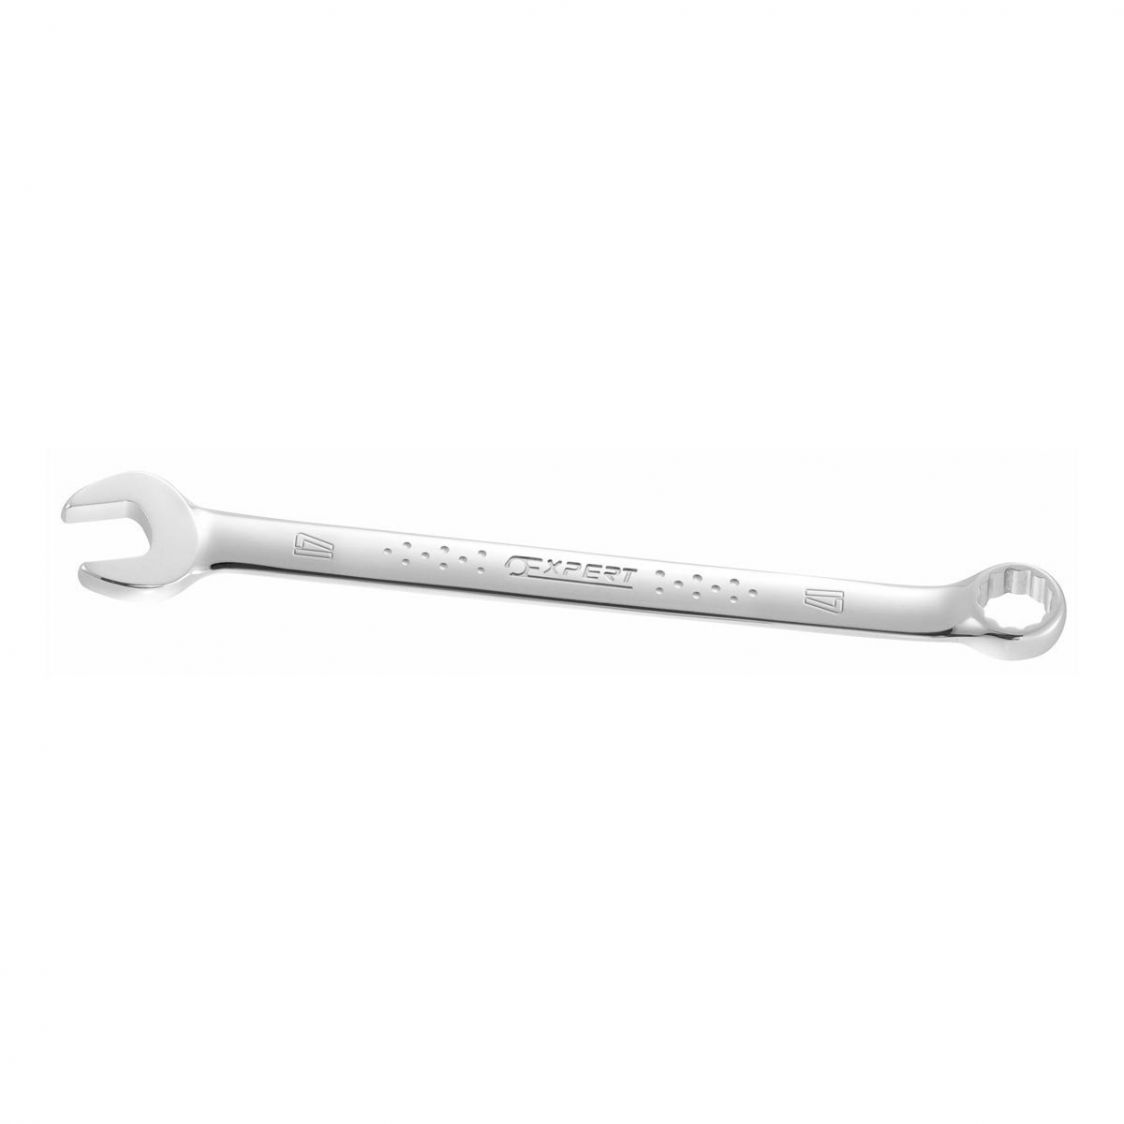 EXPERT by FACOM E117710 - 32mm Metric Long Combination Spanner